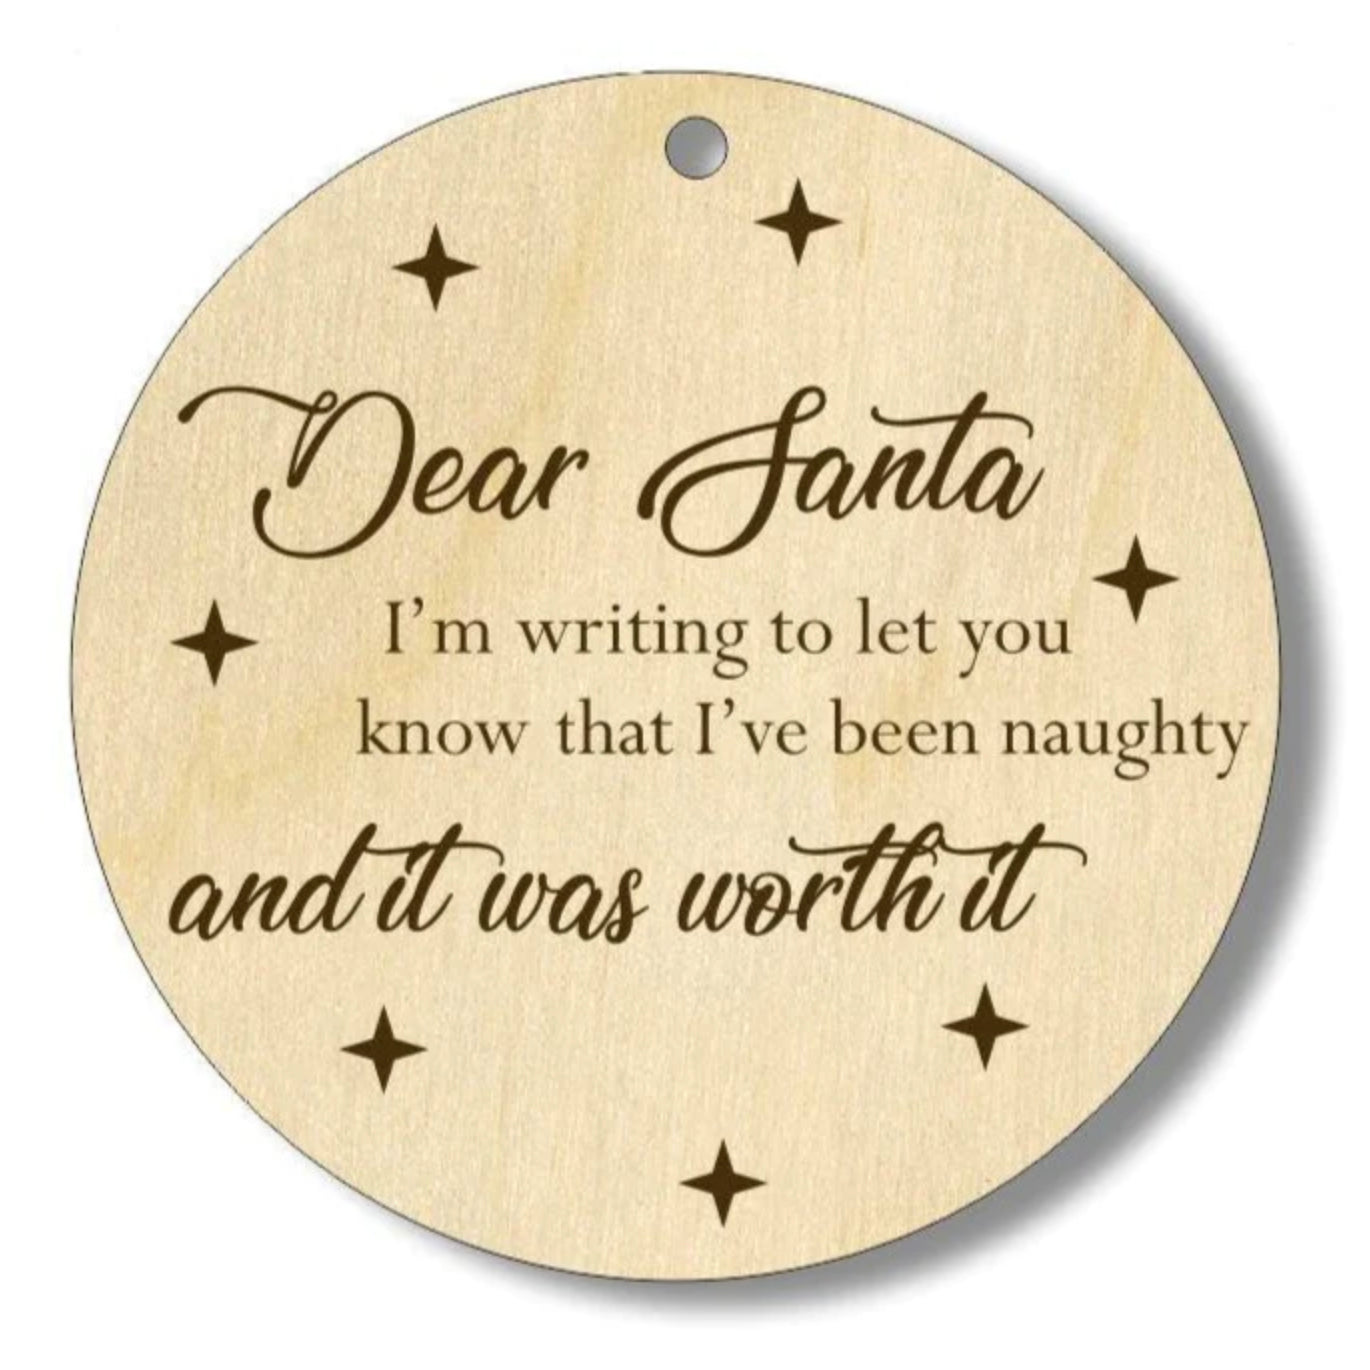 Christmas Ornaments With Quotes (Set of 5)